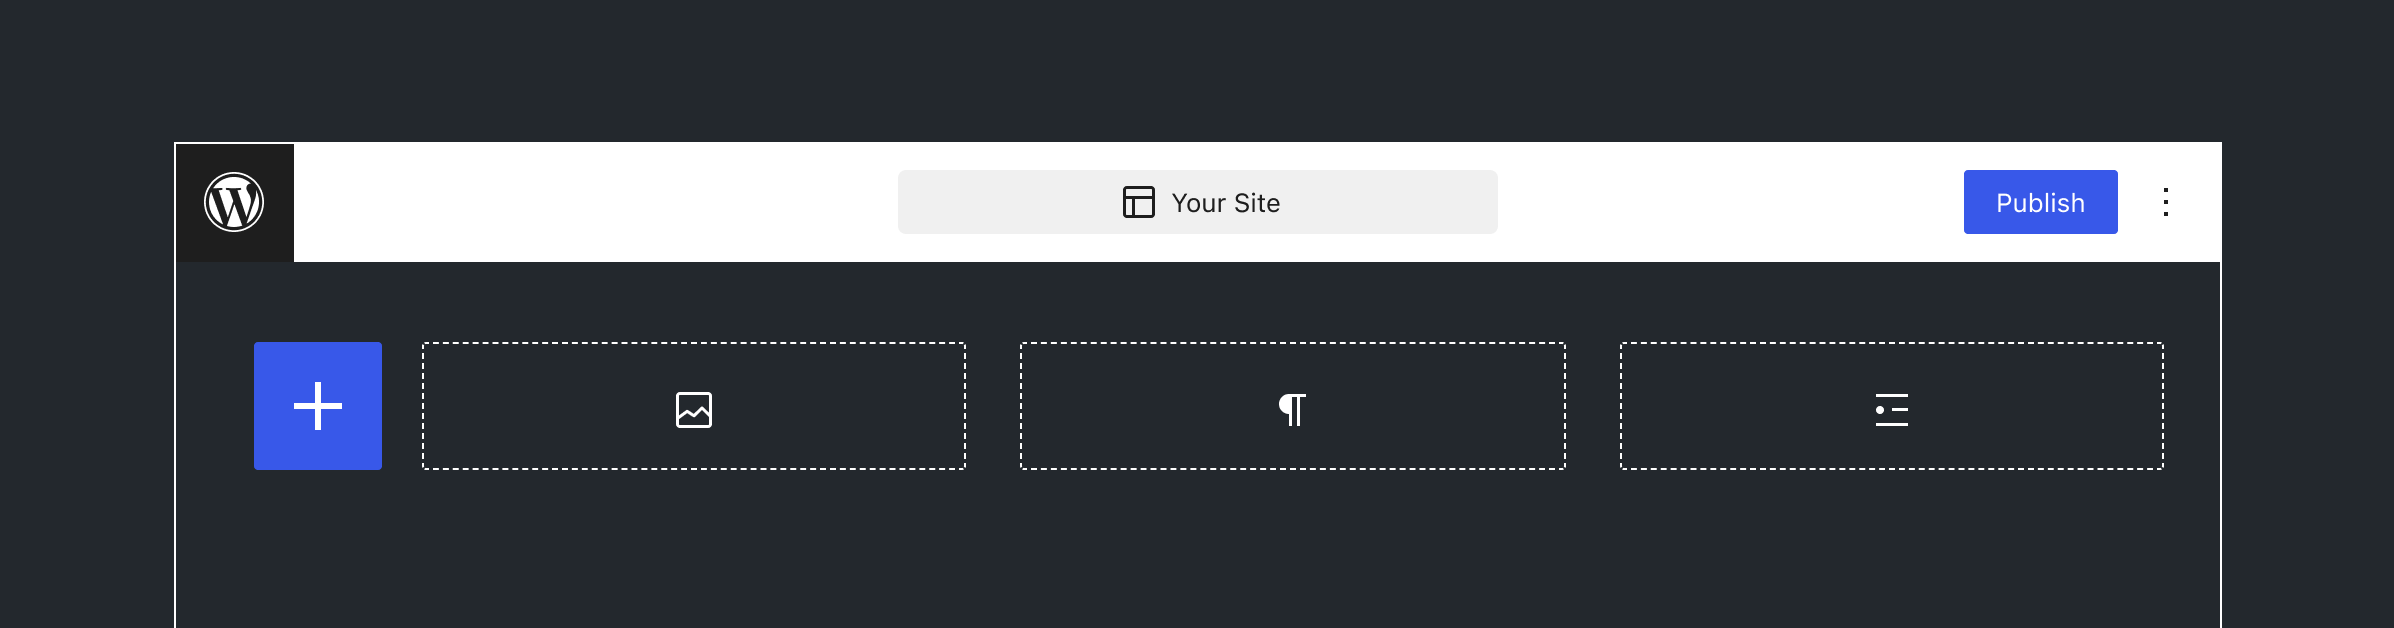 WordPress editor view showing the outline of three blocks with an inserter icon.